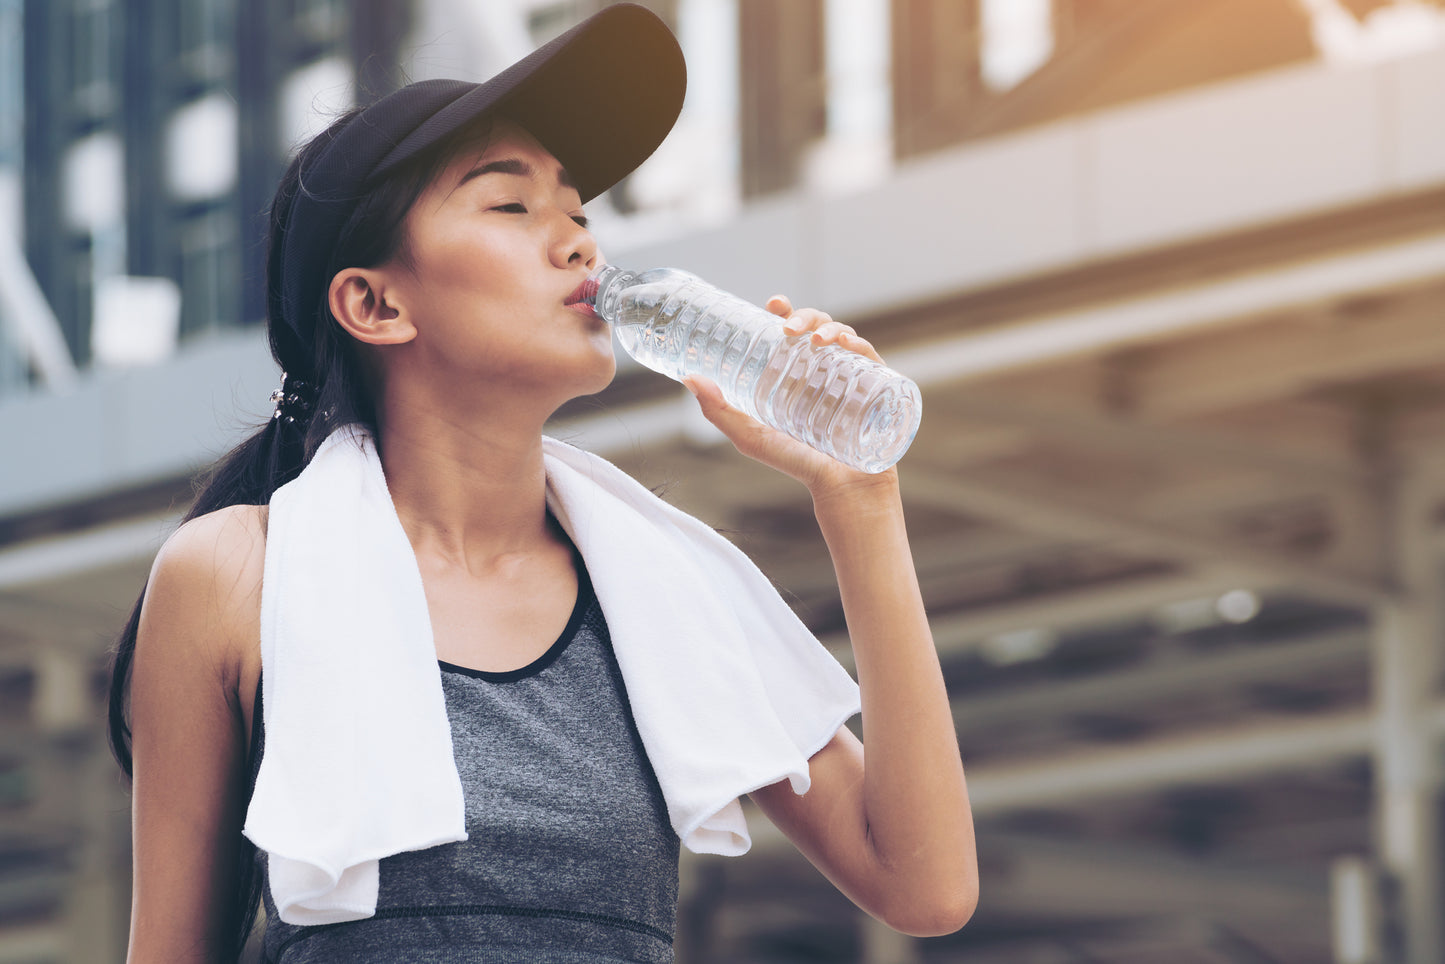 Step Aside, Sports Drinks. Here’s How To Replenish The Electrolytes Your Body Needs.